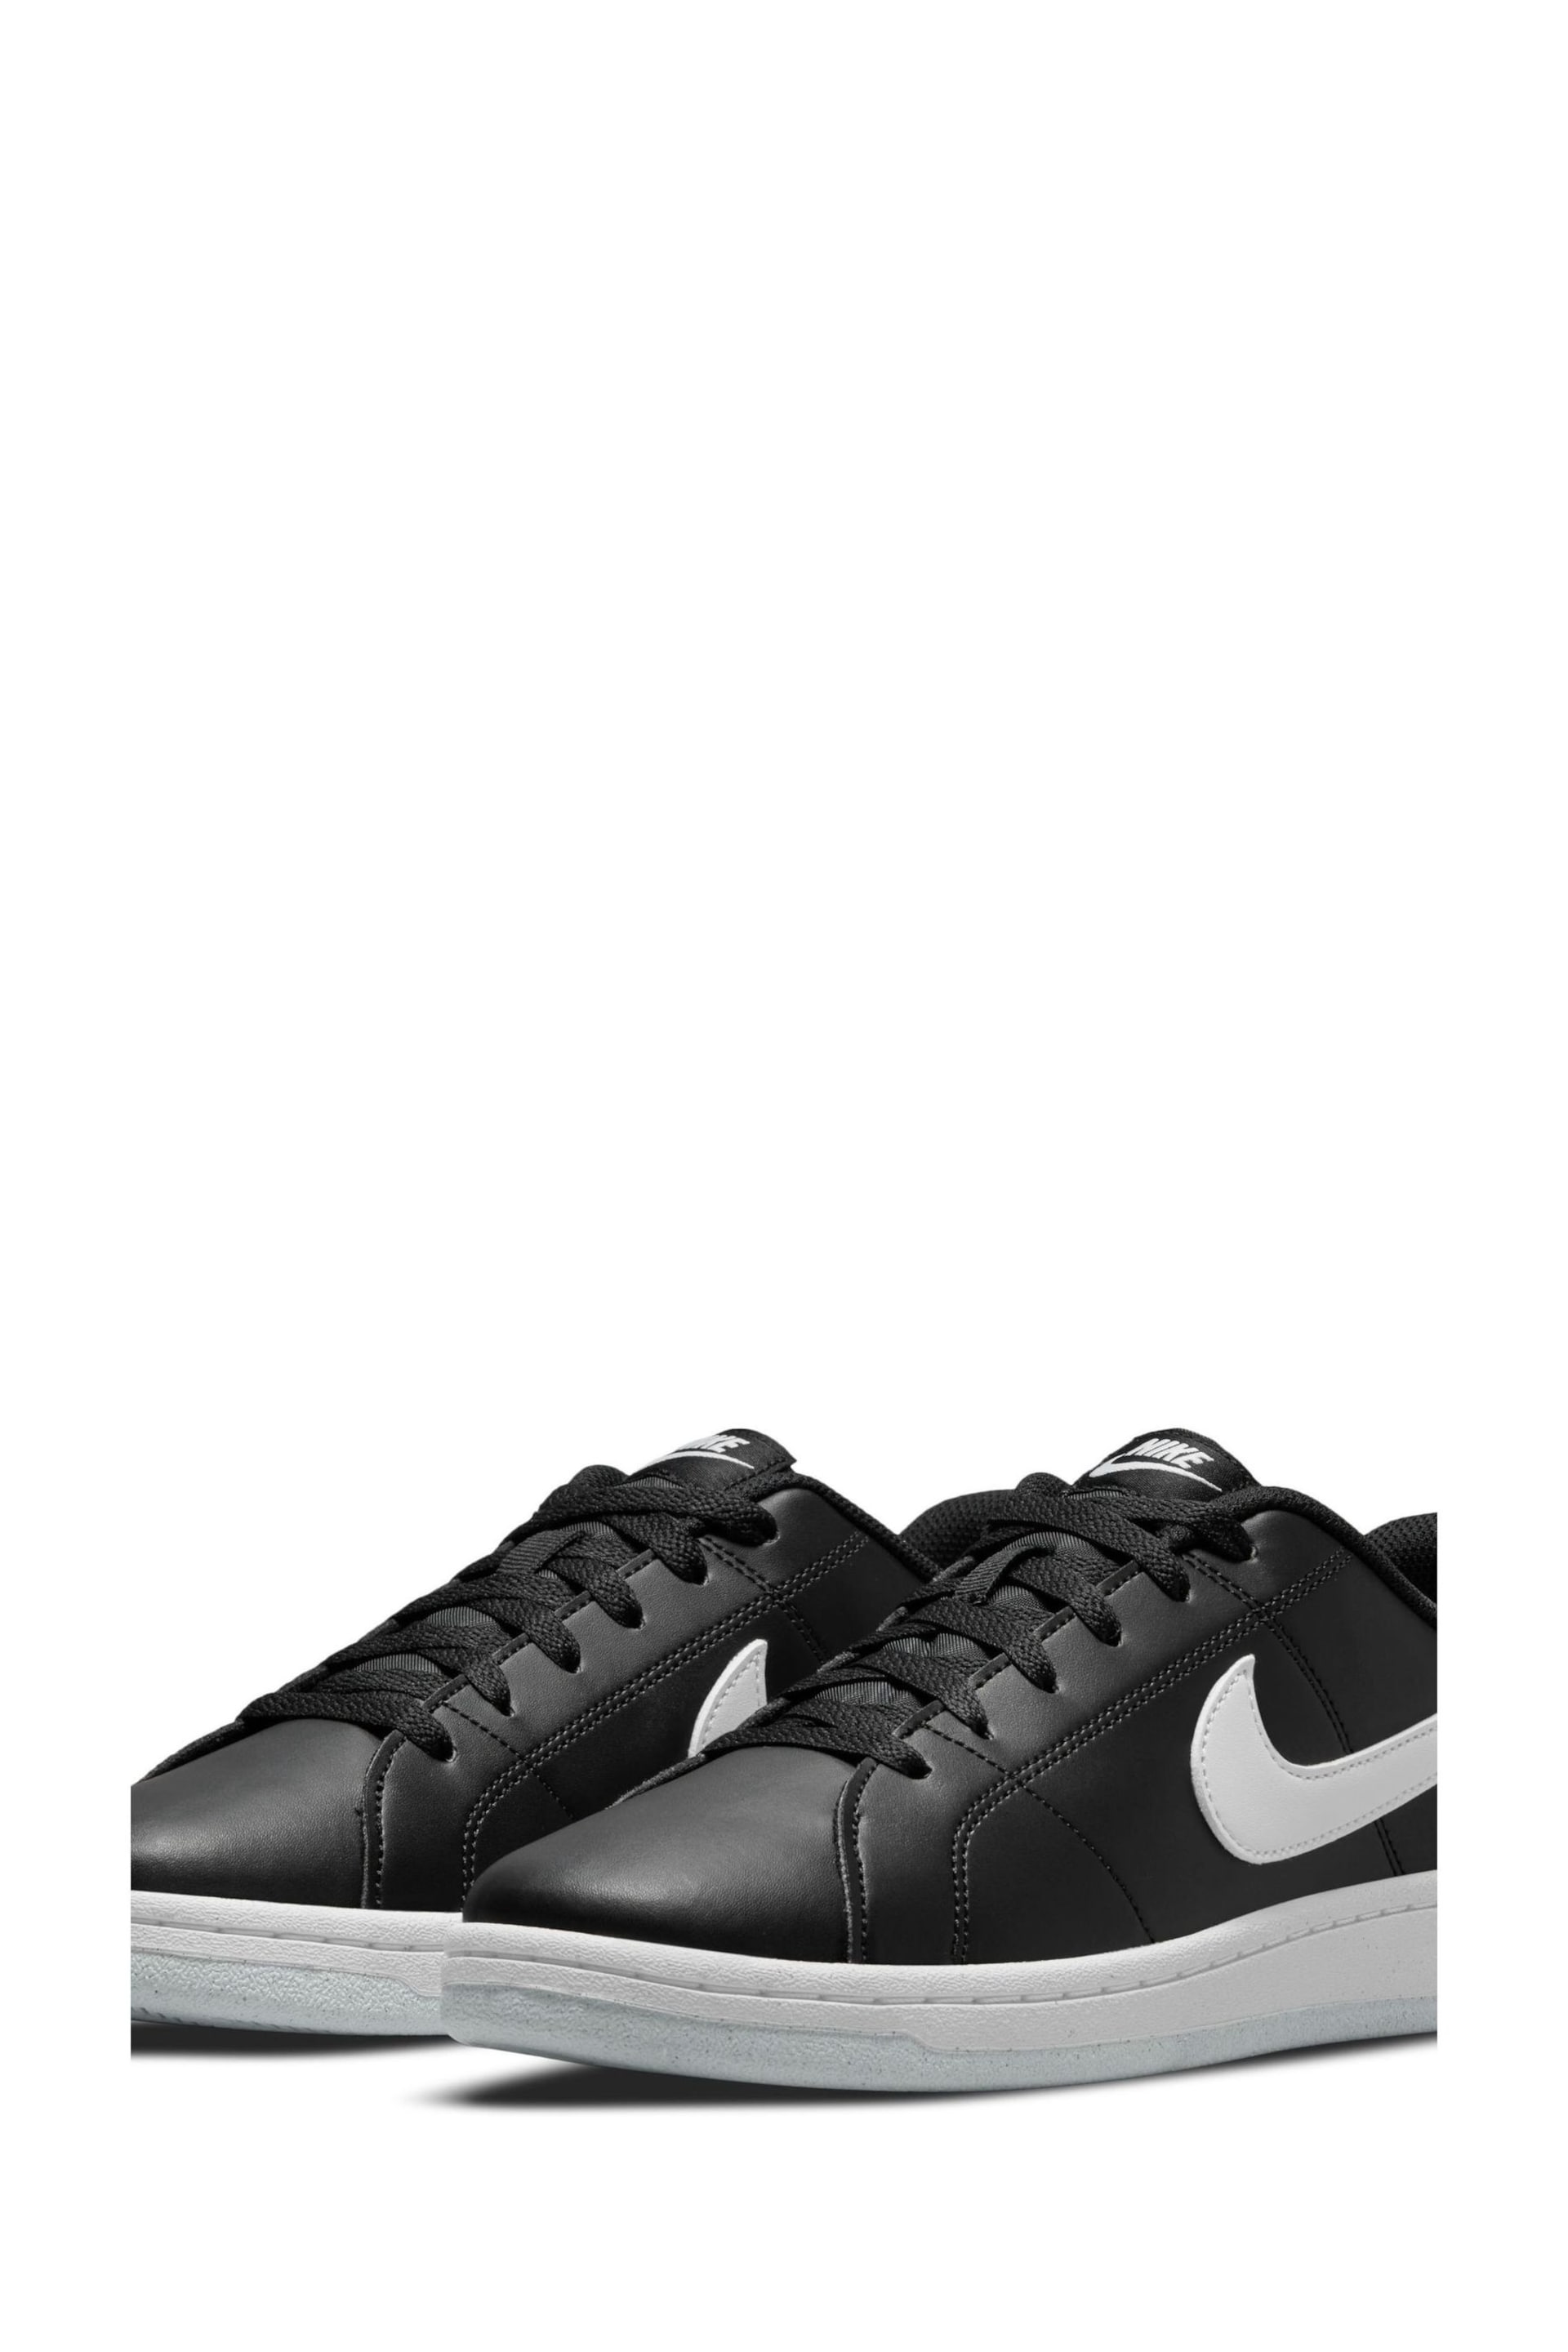 Nike Black Court Royale Trainers - Image 3 of 8